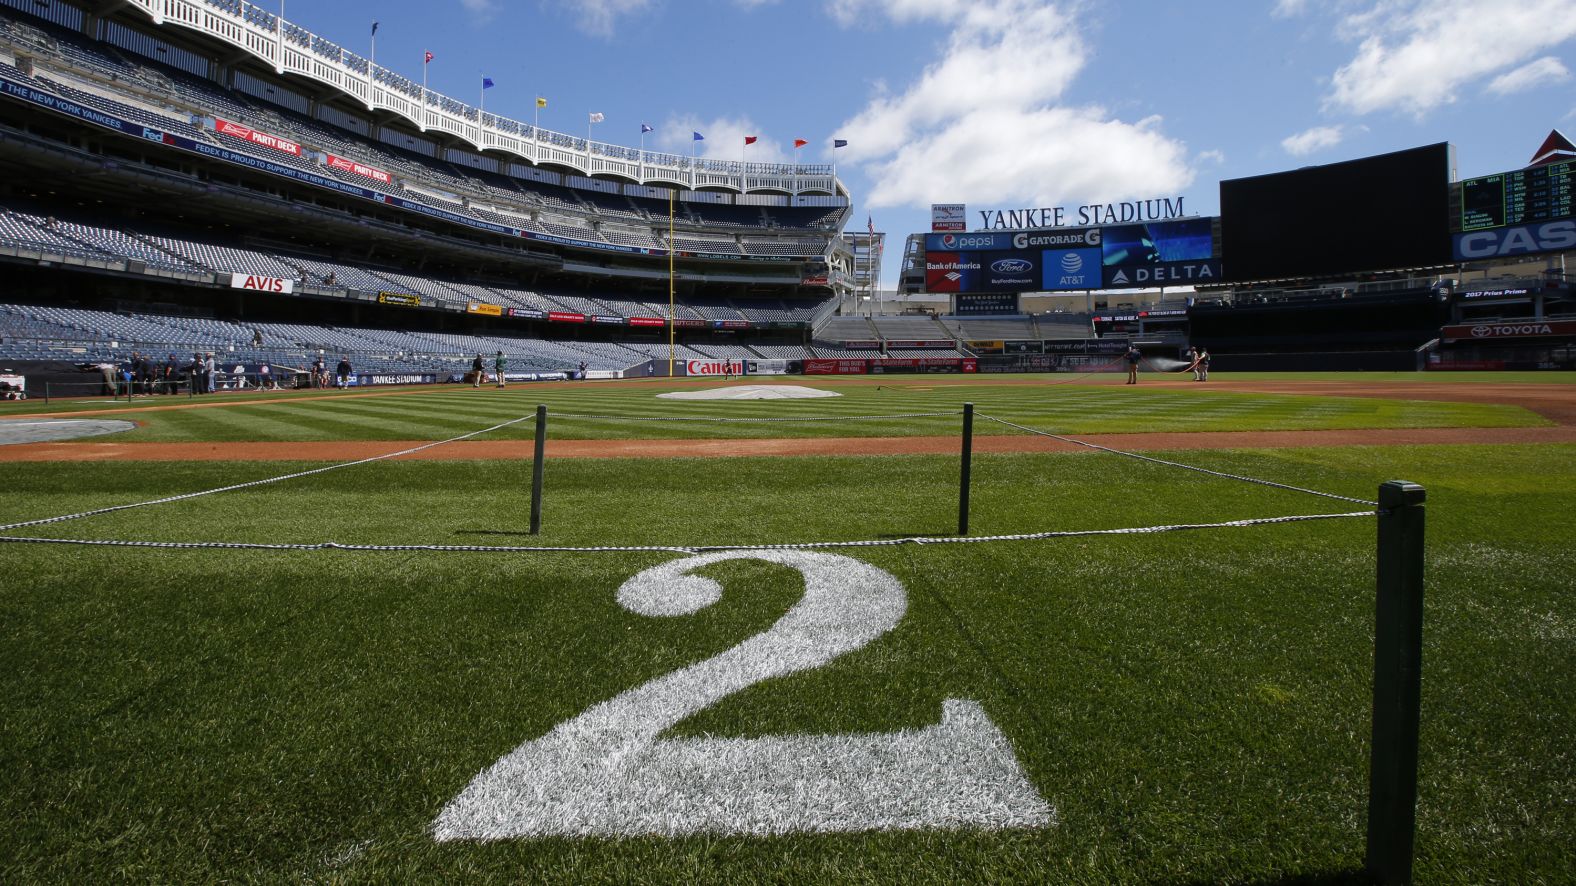 Jeter's number is painted on the field before a game at Yankee Stadium in May 2017. Jeter had his number retired between a doubleheader.